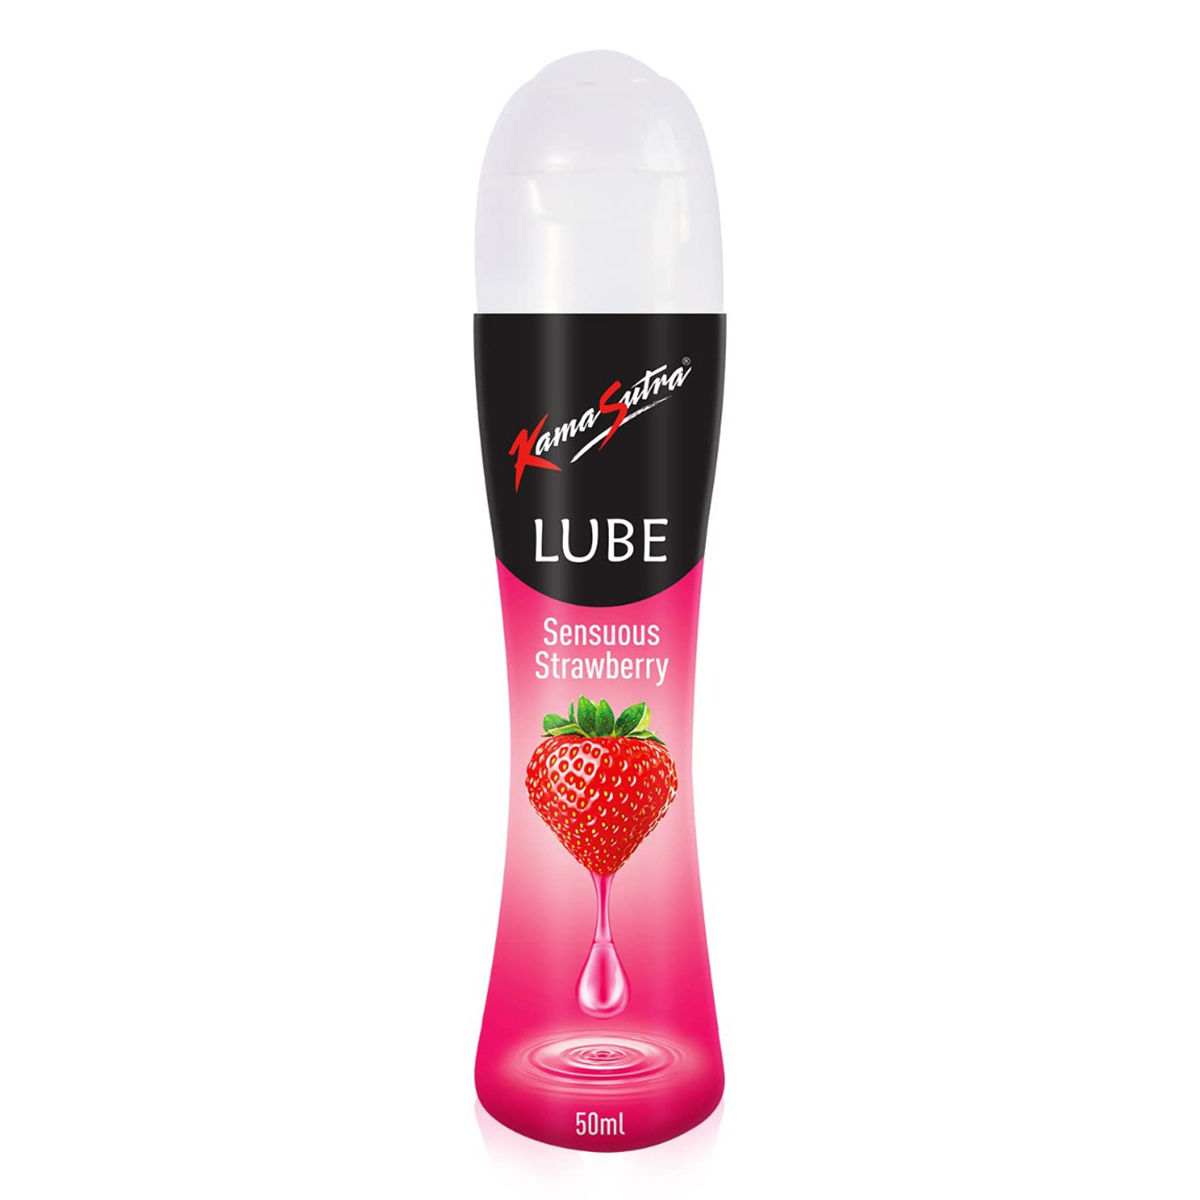 Buy Kamasutra Strawberry Flavour Personal Lubricant, 50 ml Online